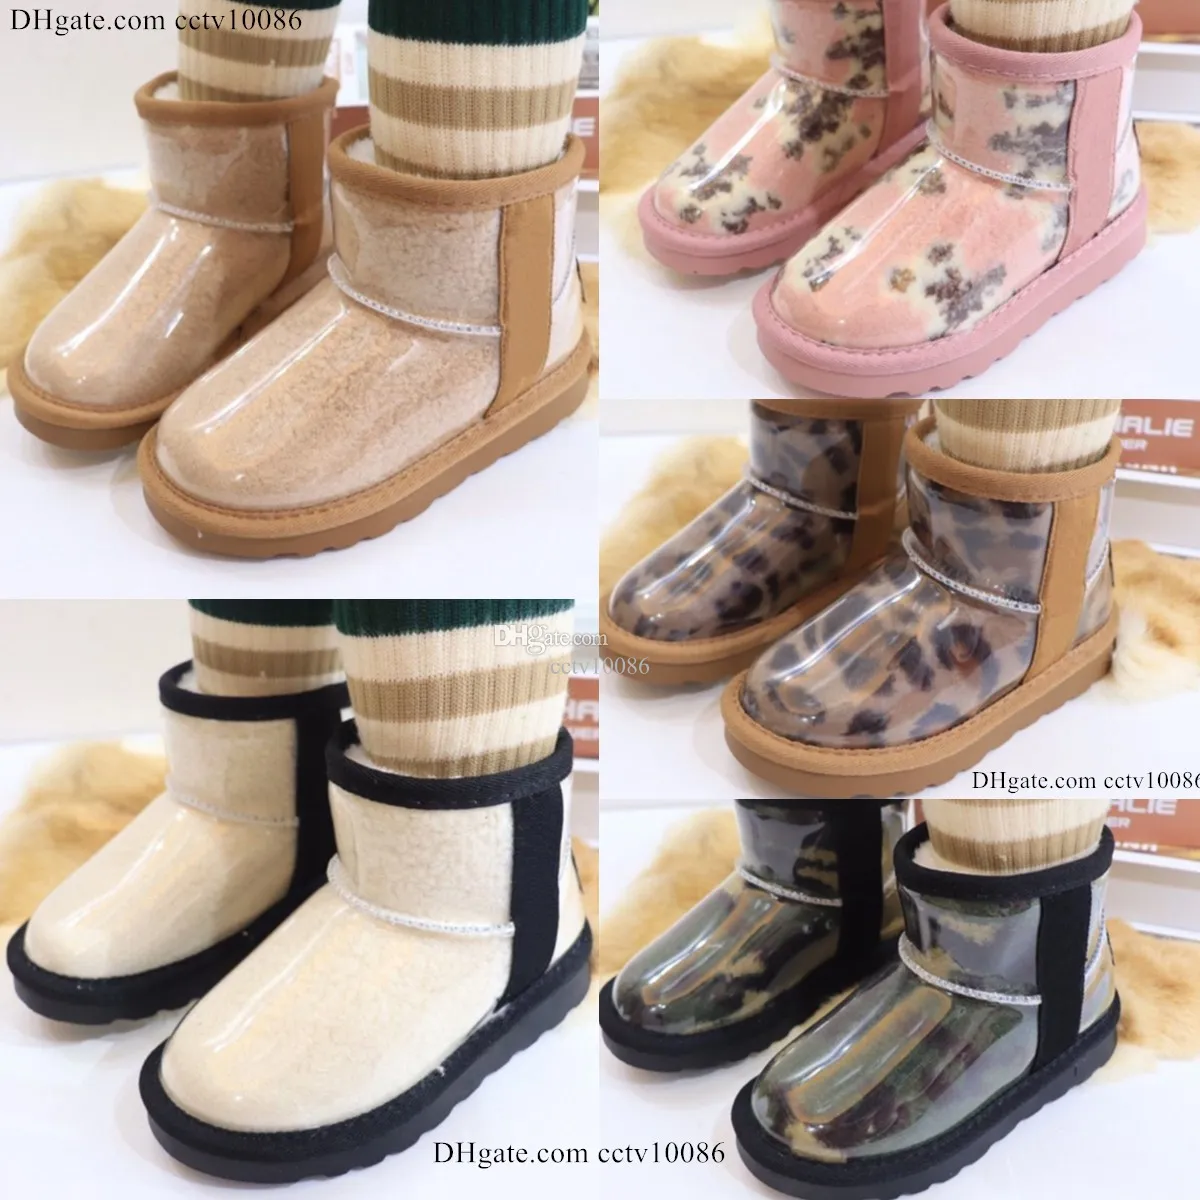 Australia Classic Mini Boots Clear Kids uggi Shoes Girls designer Jelly Toddler ug baby Children winter Snow Boot kid youth sneaker wggs shoe Natural g5Ea#